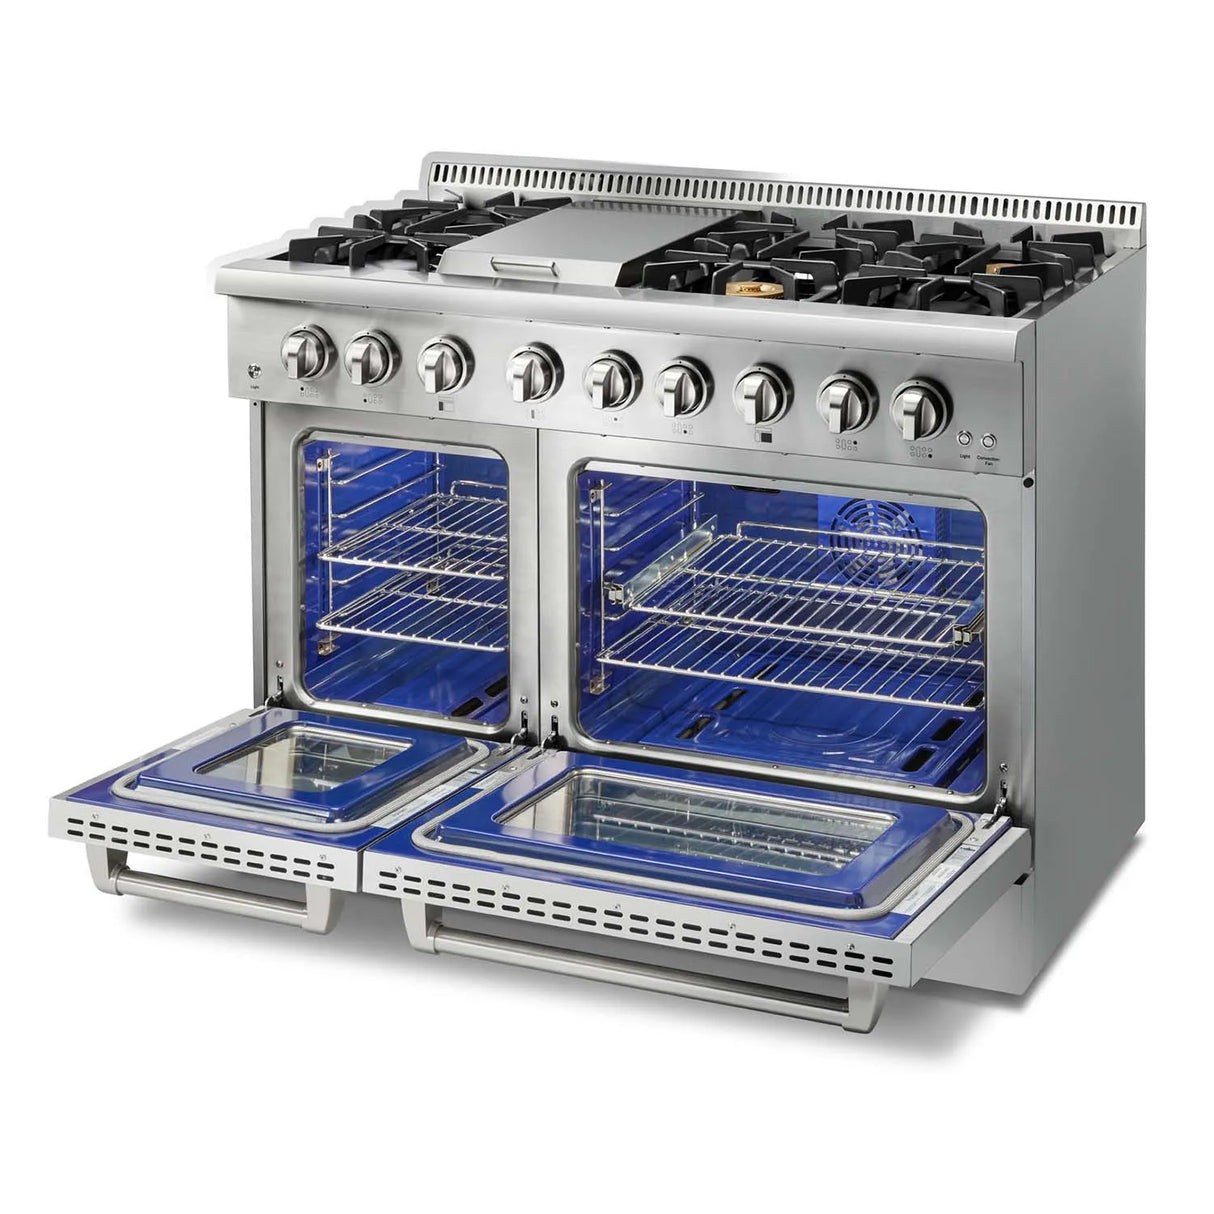 THOR 48 Inch Professional Dual Fuel Range in Stainless Steel – HRD4803U